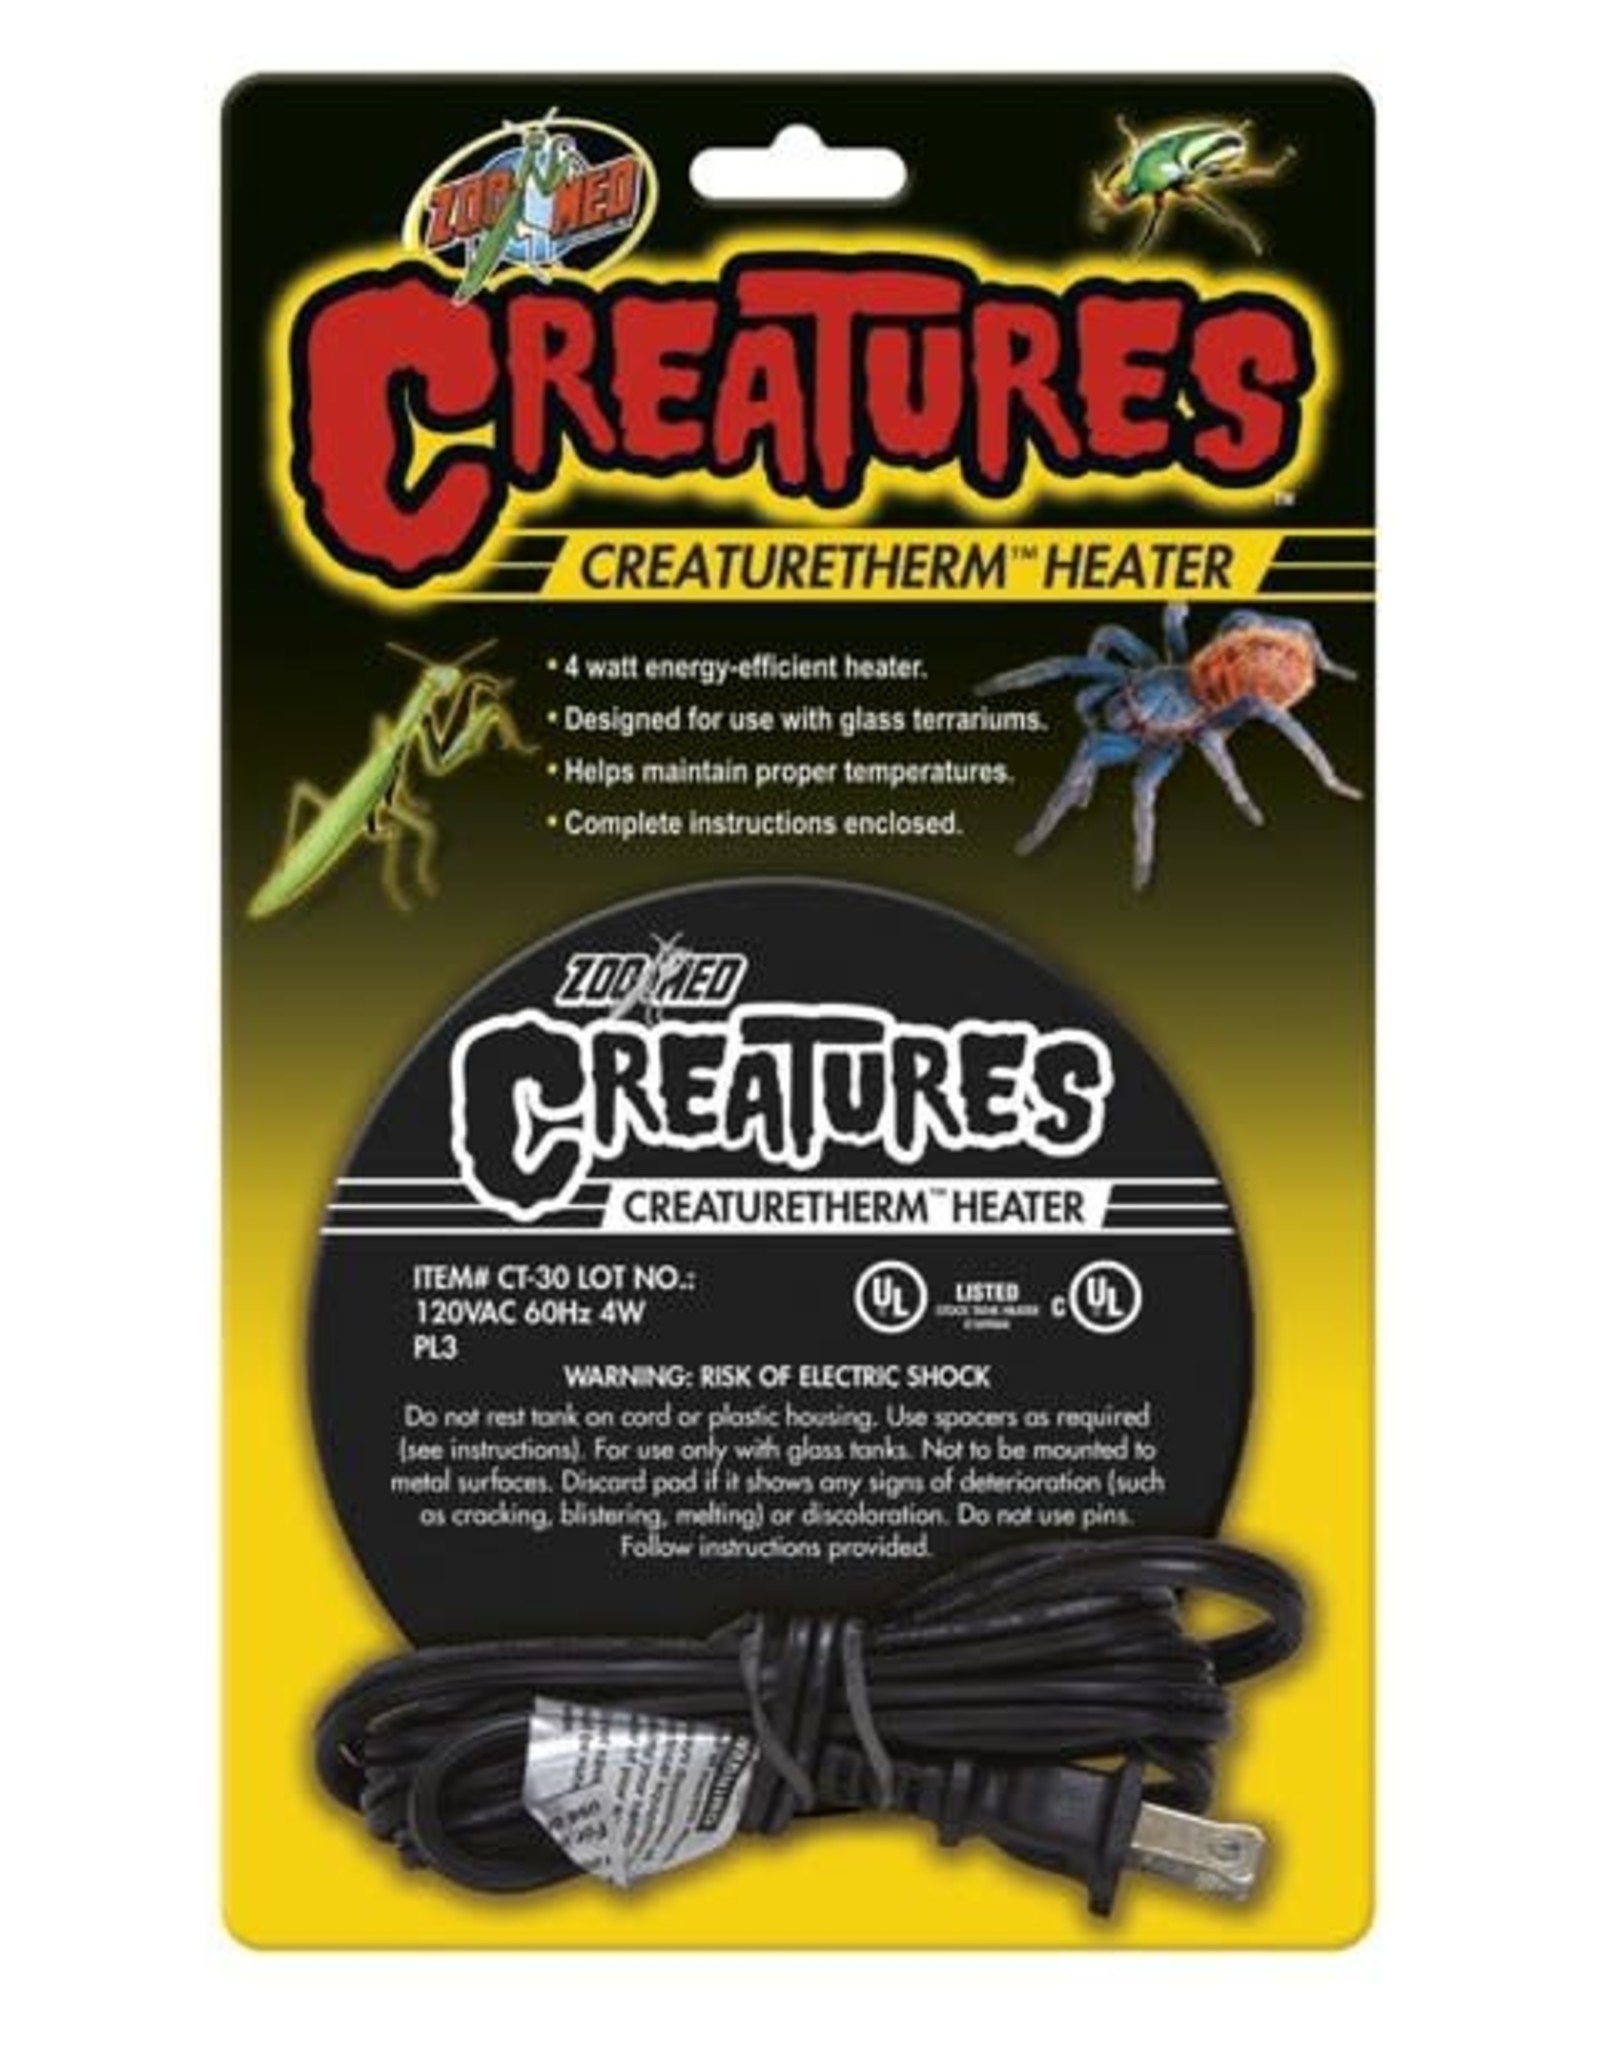 ZOO MED LABORATORIES, INC. ZOO MED- CT-30- CREATURES- THERM HEATER- 6.5X6.5- 4 W